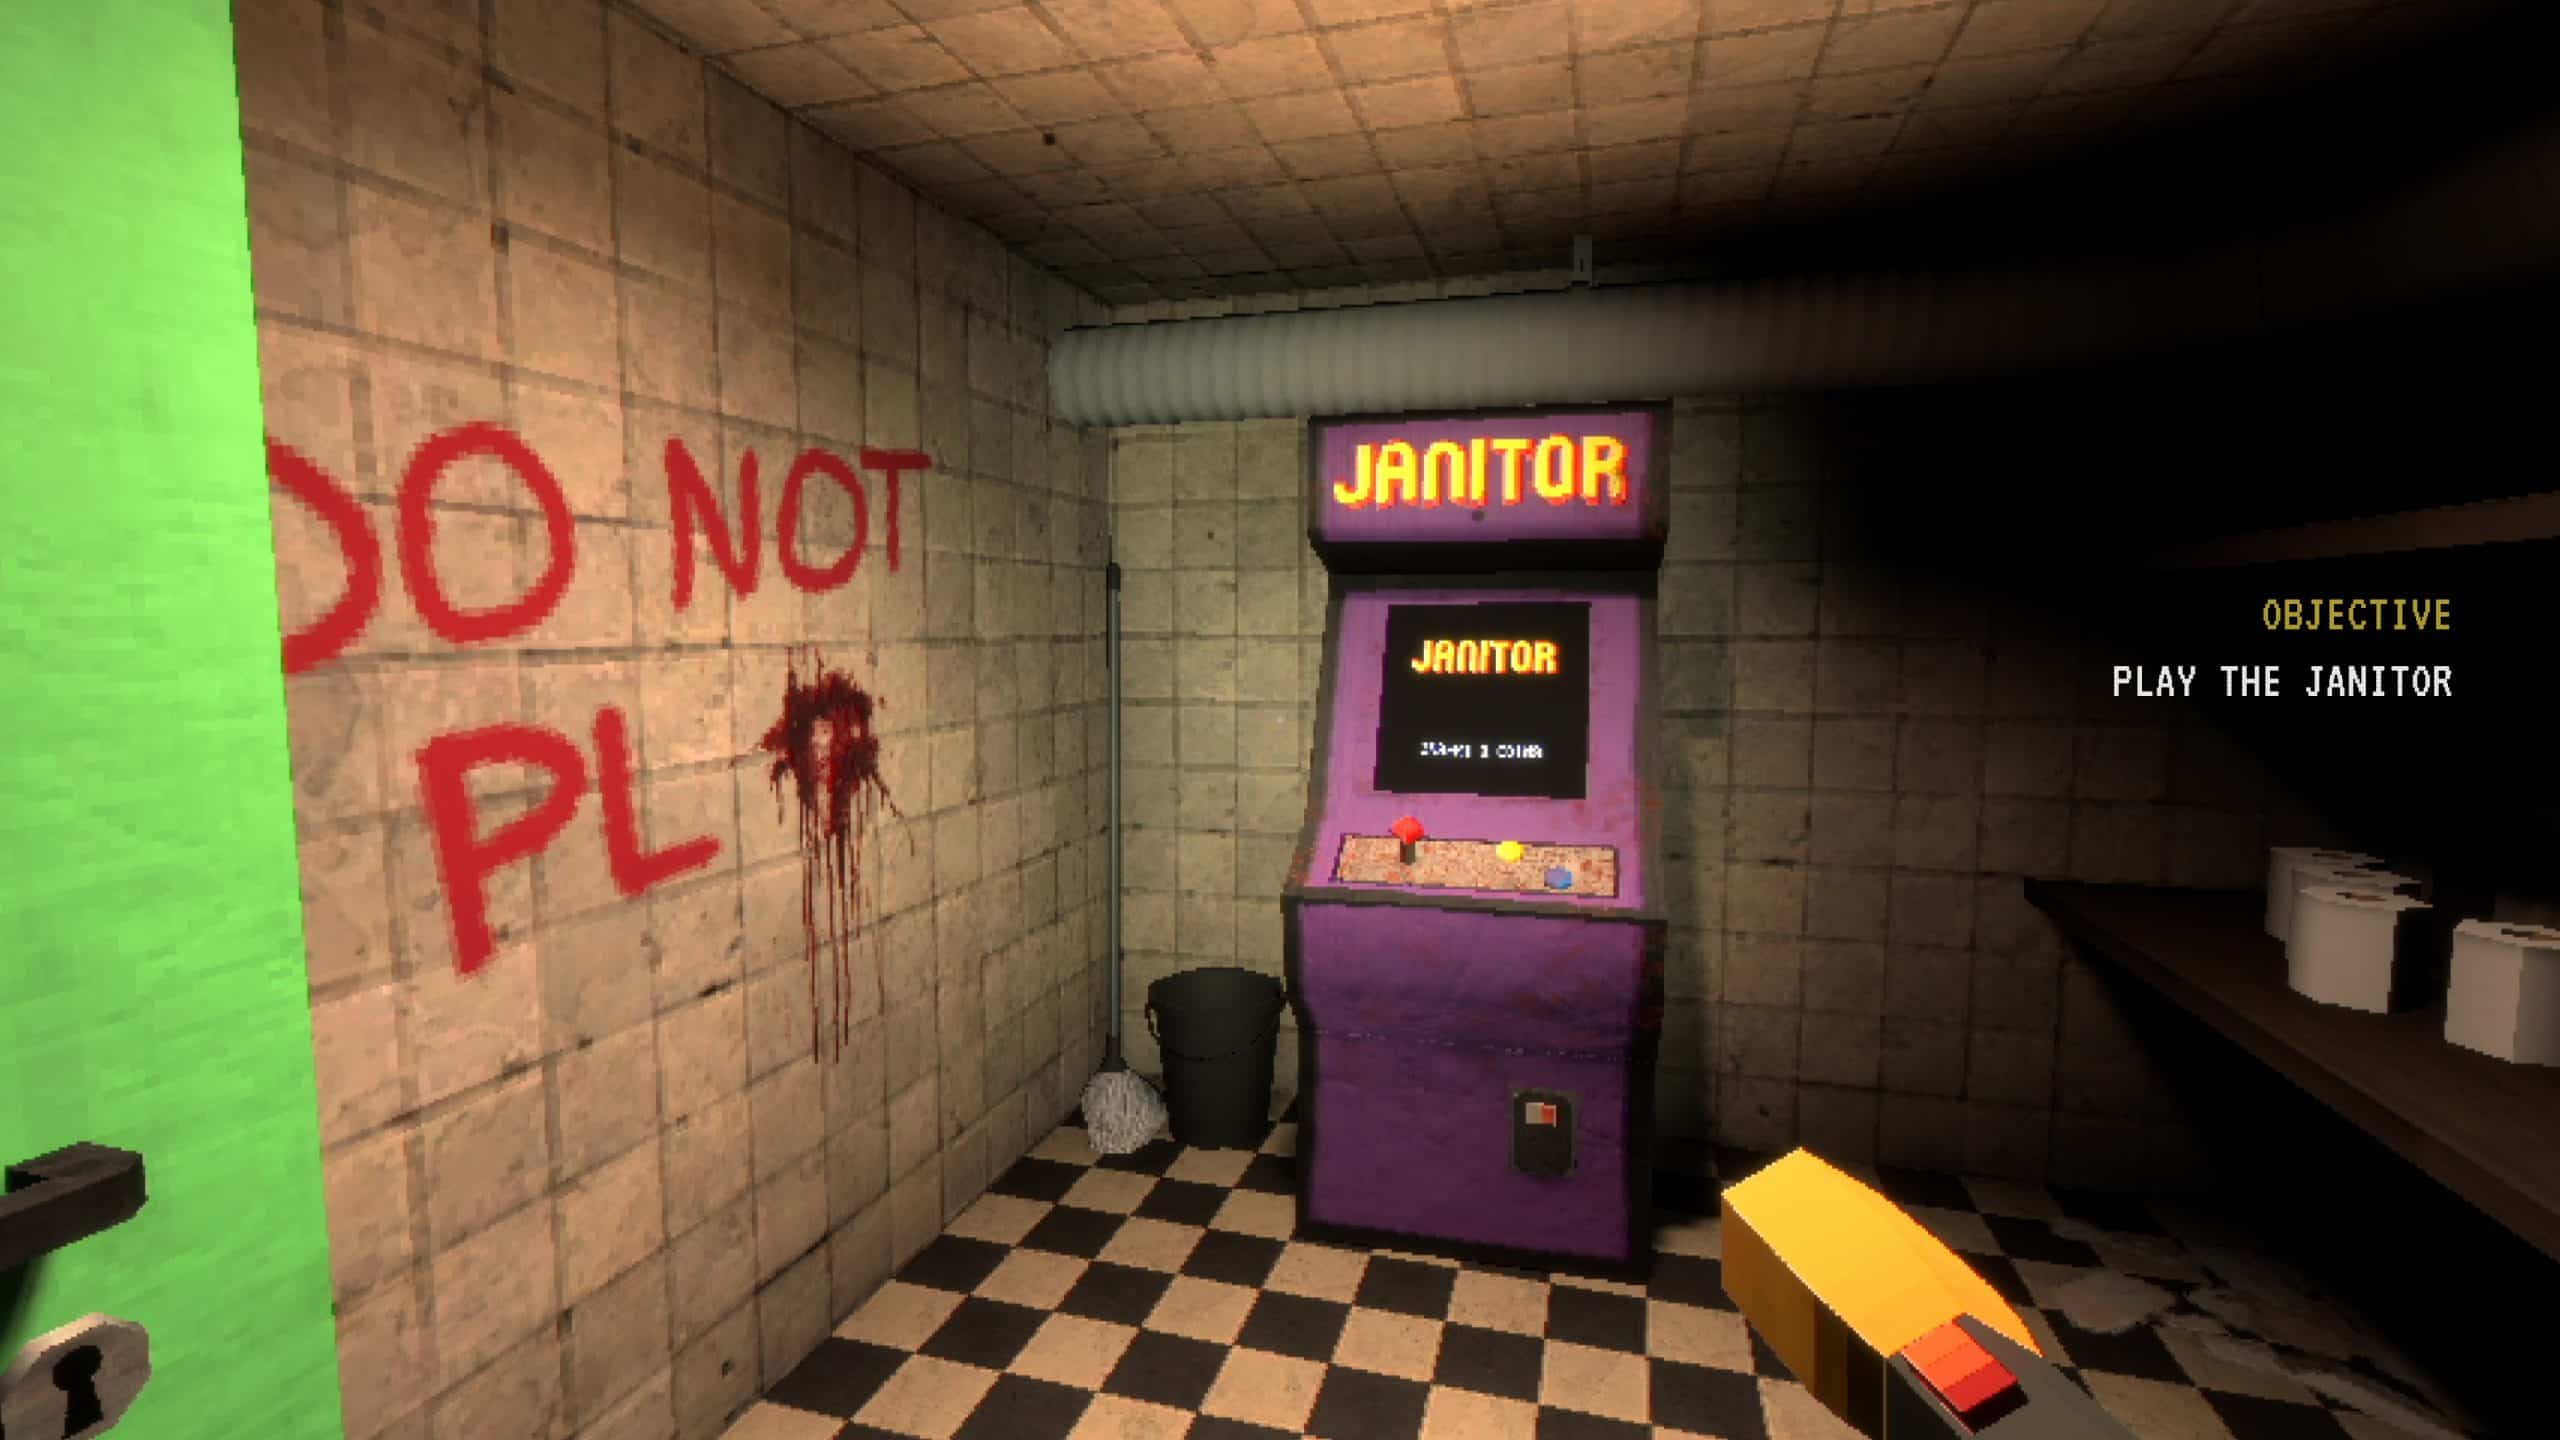 an arcade machine called Janitor placed in a dark horror-looking arcade with black and white tiles and a wall with a written message printed in red